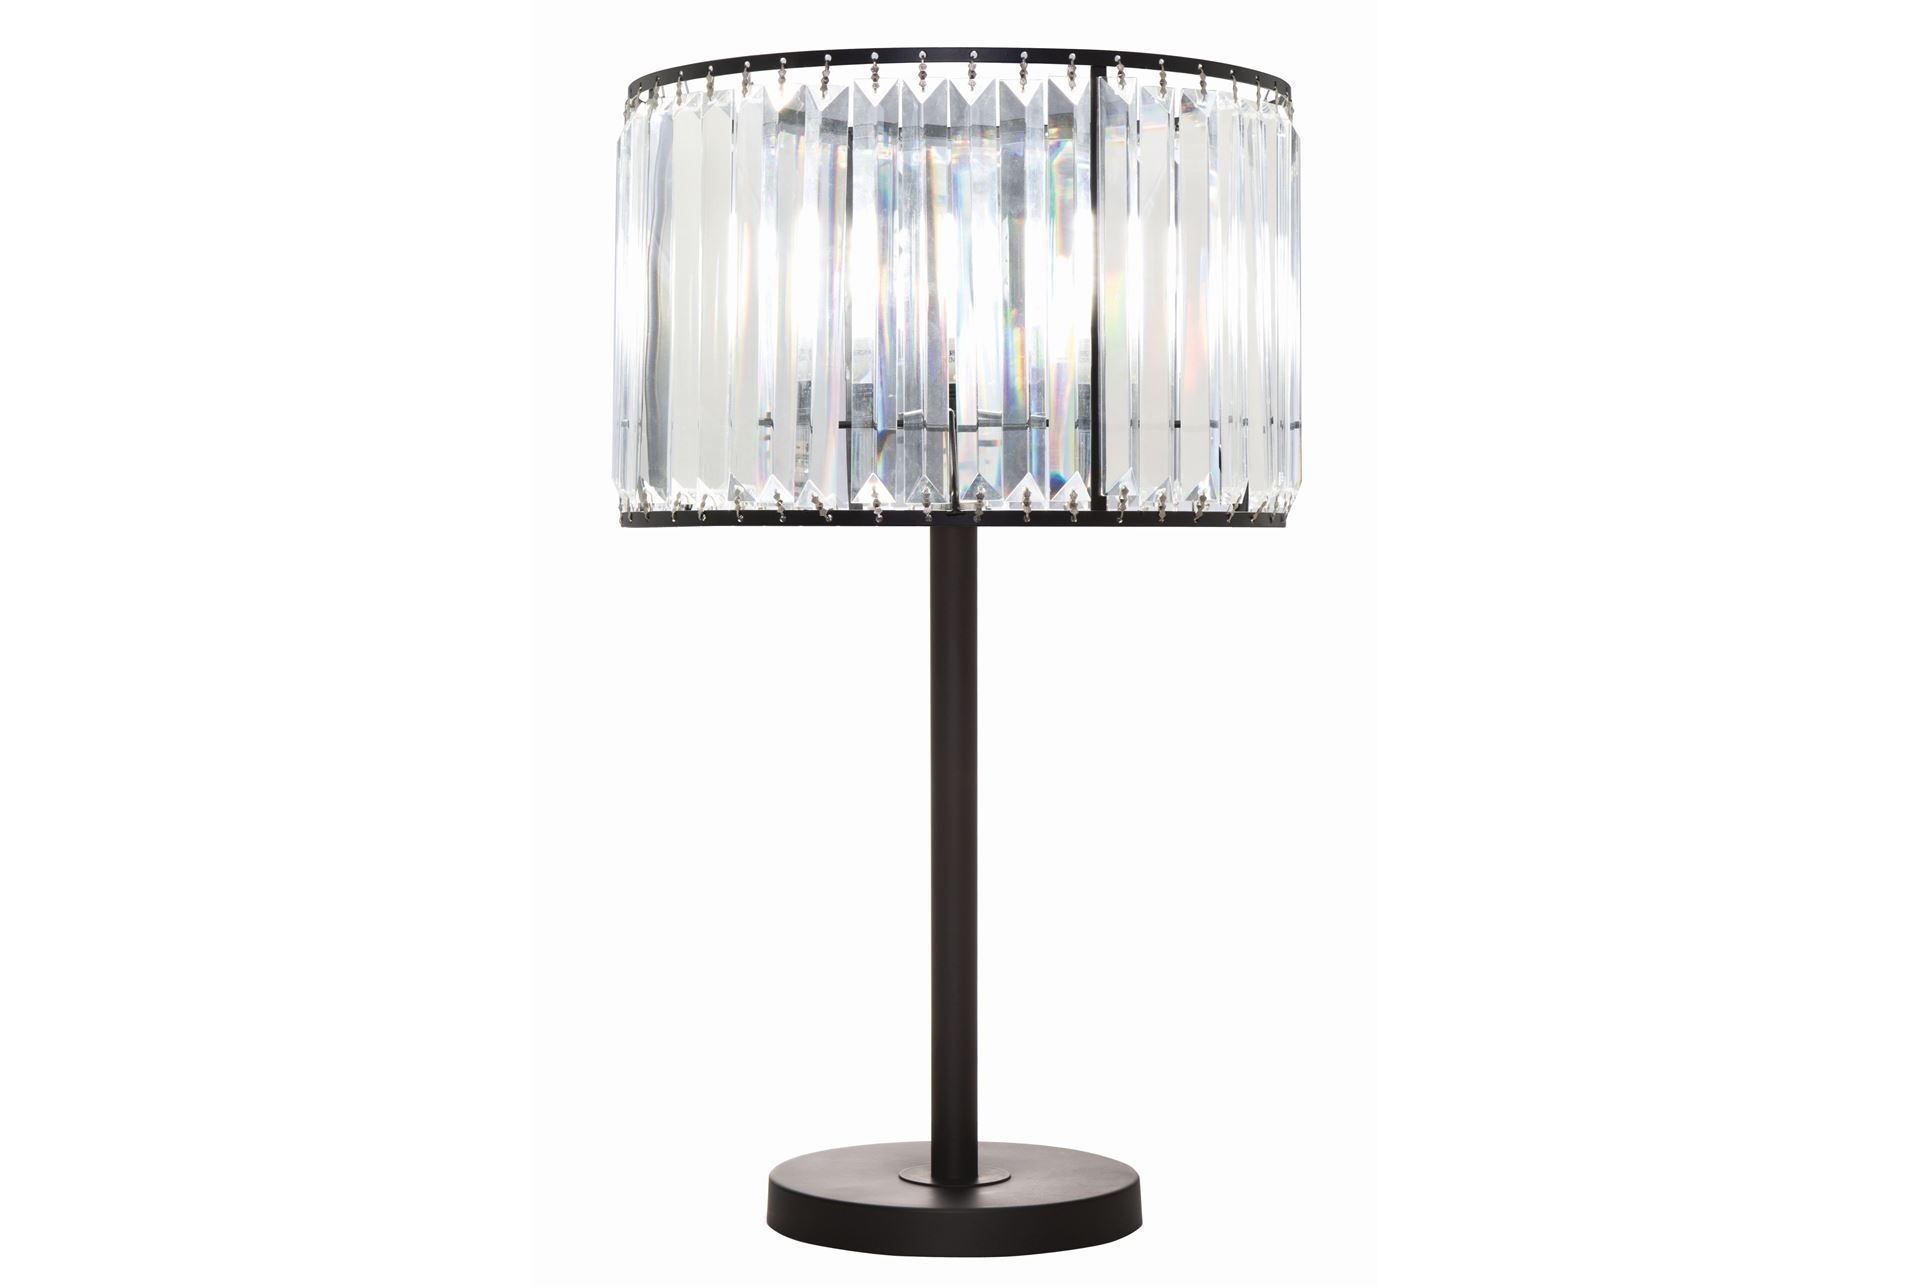 Living Room : Crystal Table Lamps Small Table Lamps Crystal Throughout Crystal Living Room Table Lamps (View 10 of 15)